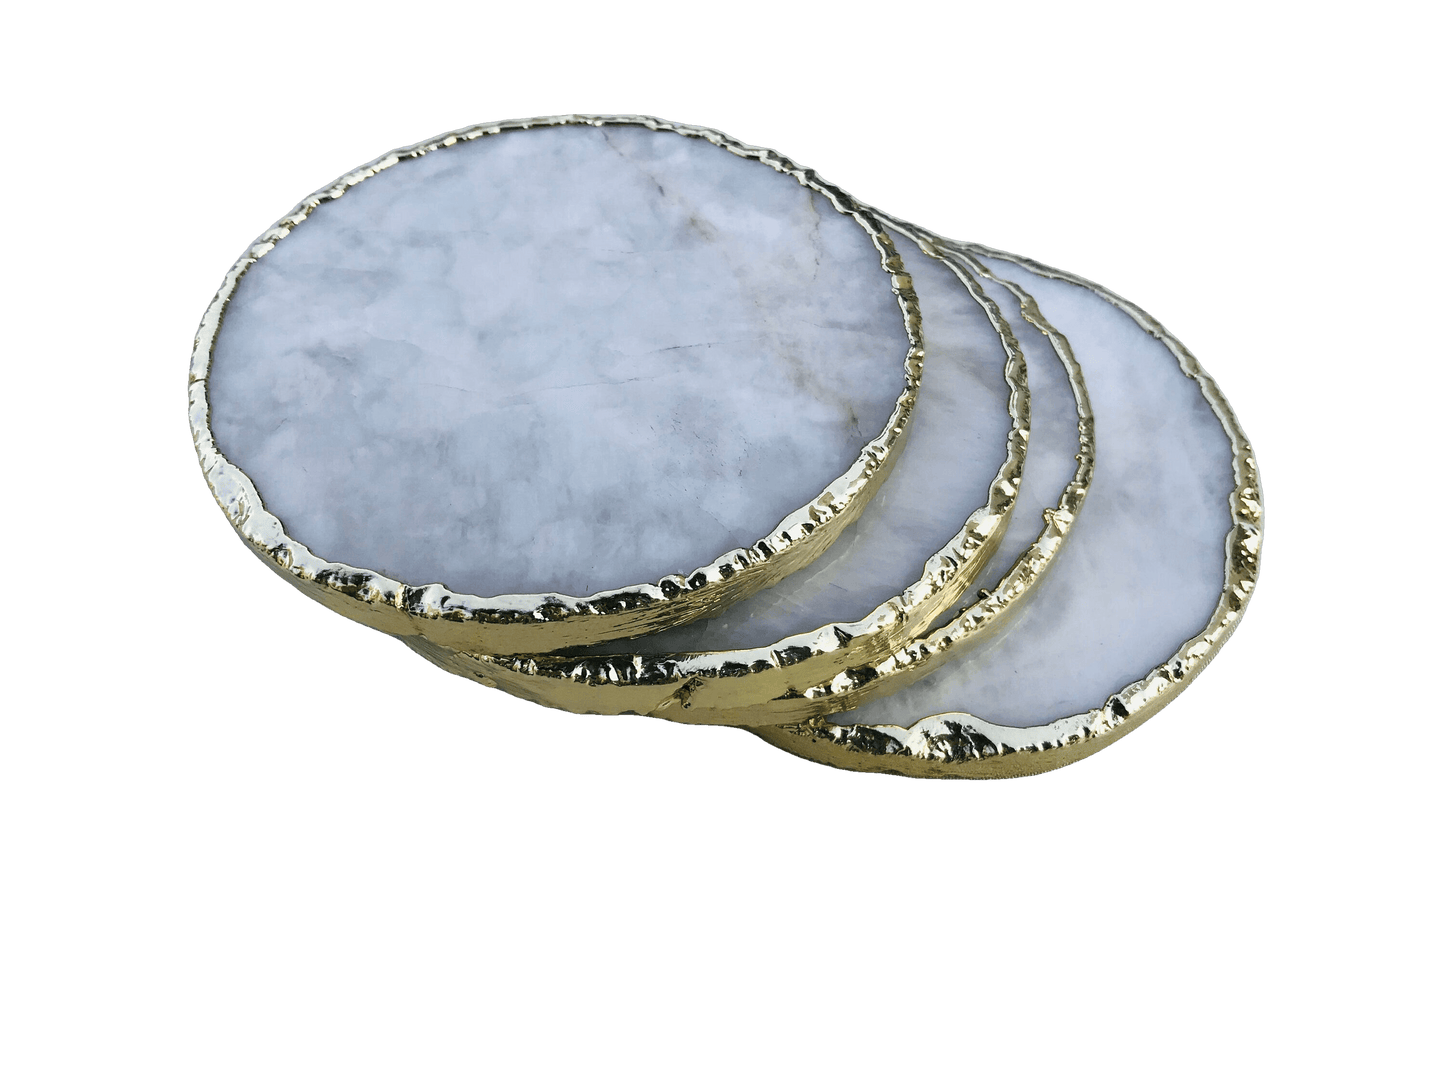 White Agate Hand Rounded Coasters - Set of 4 - MAIA HOMES